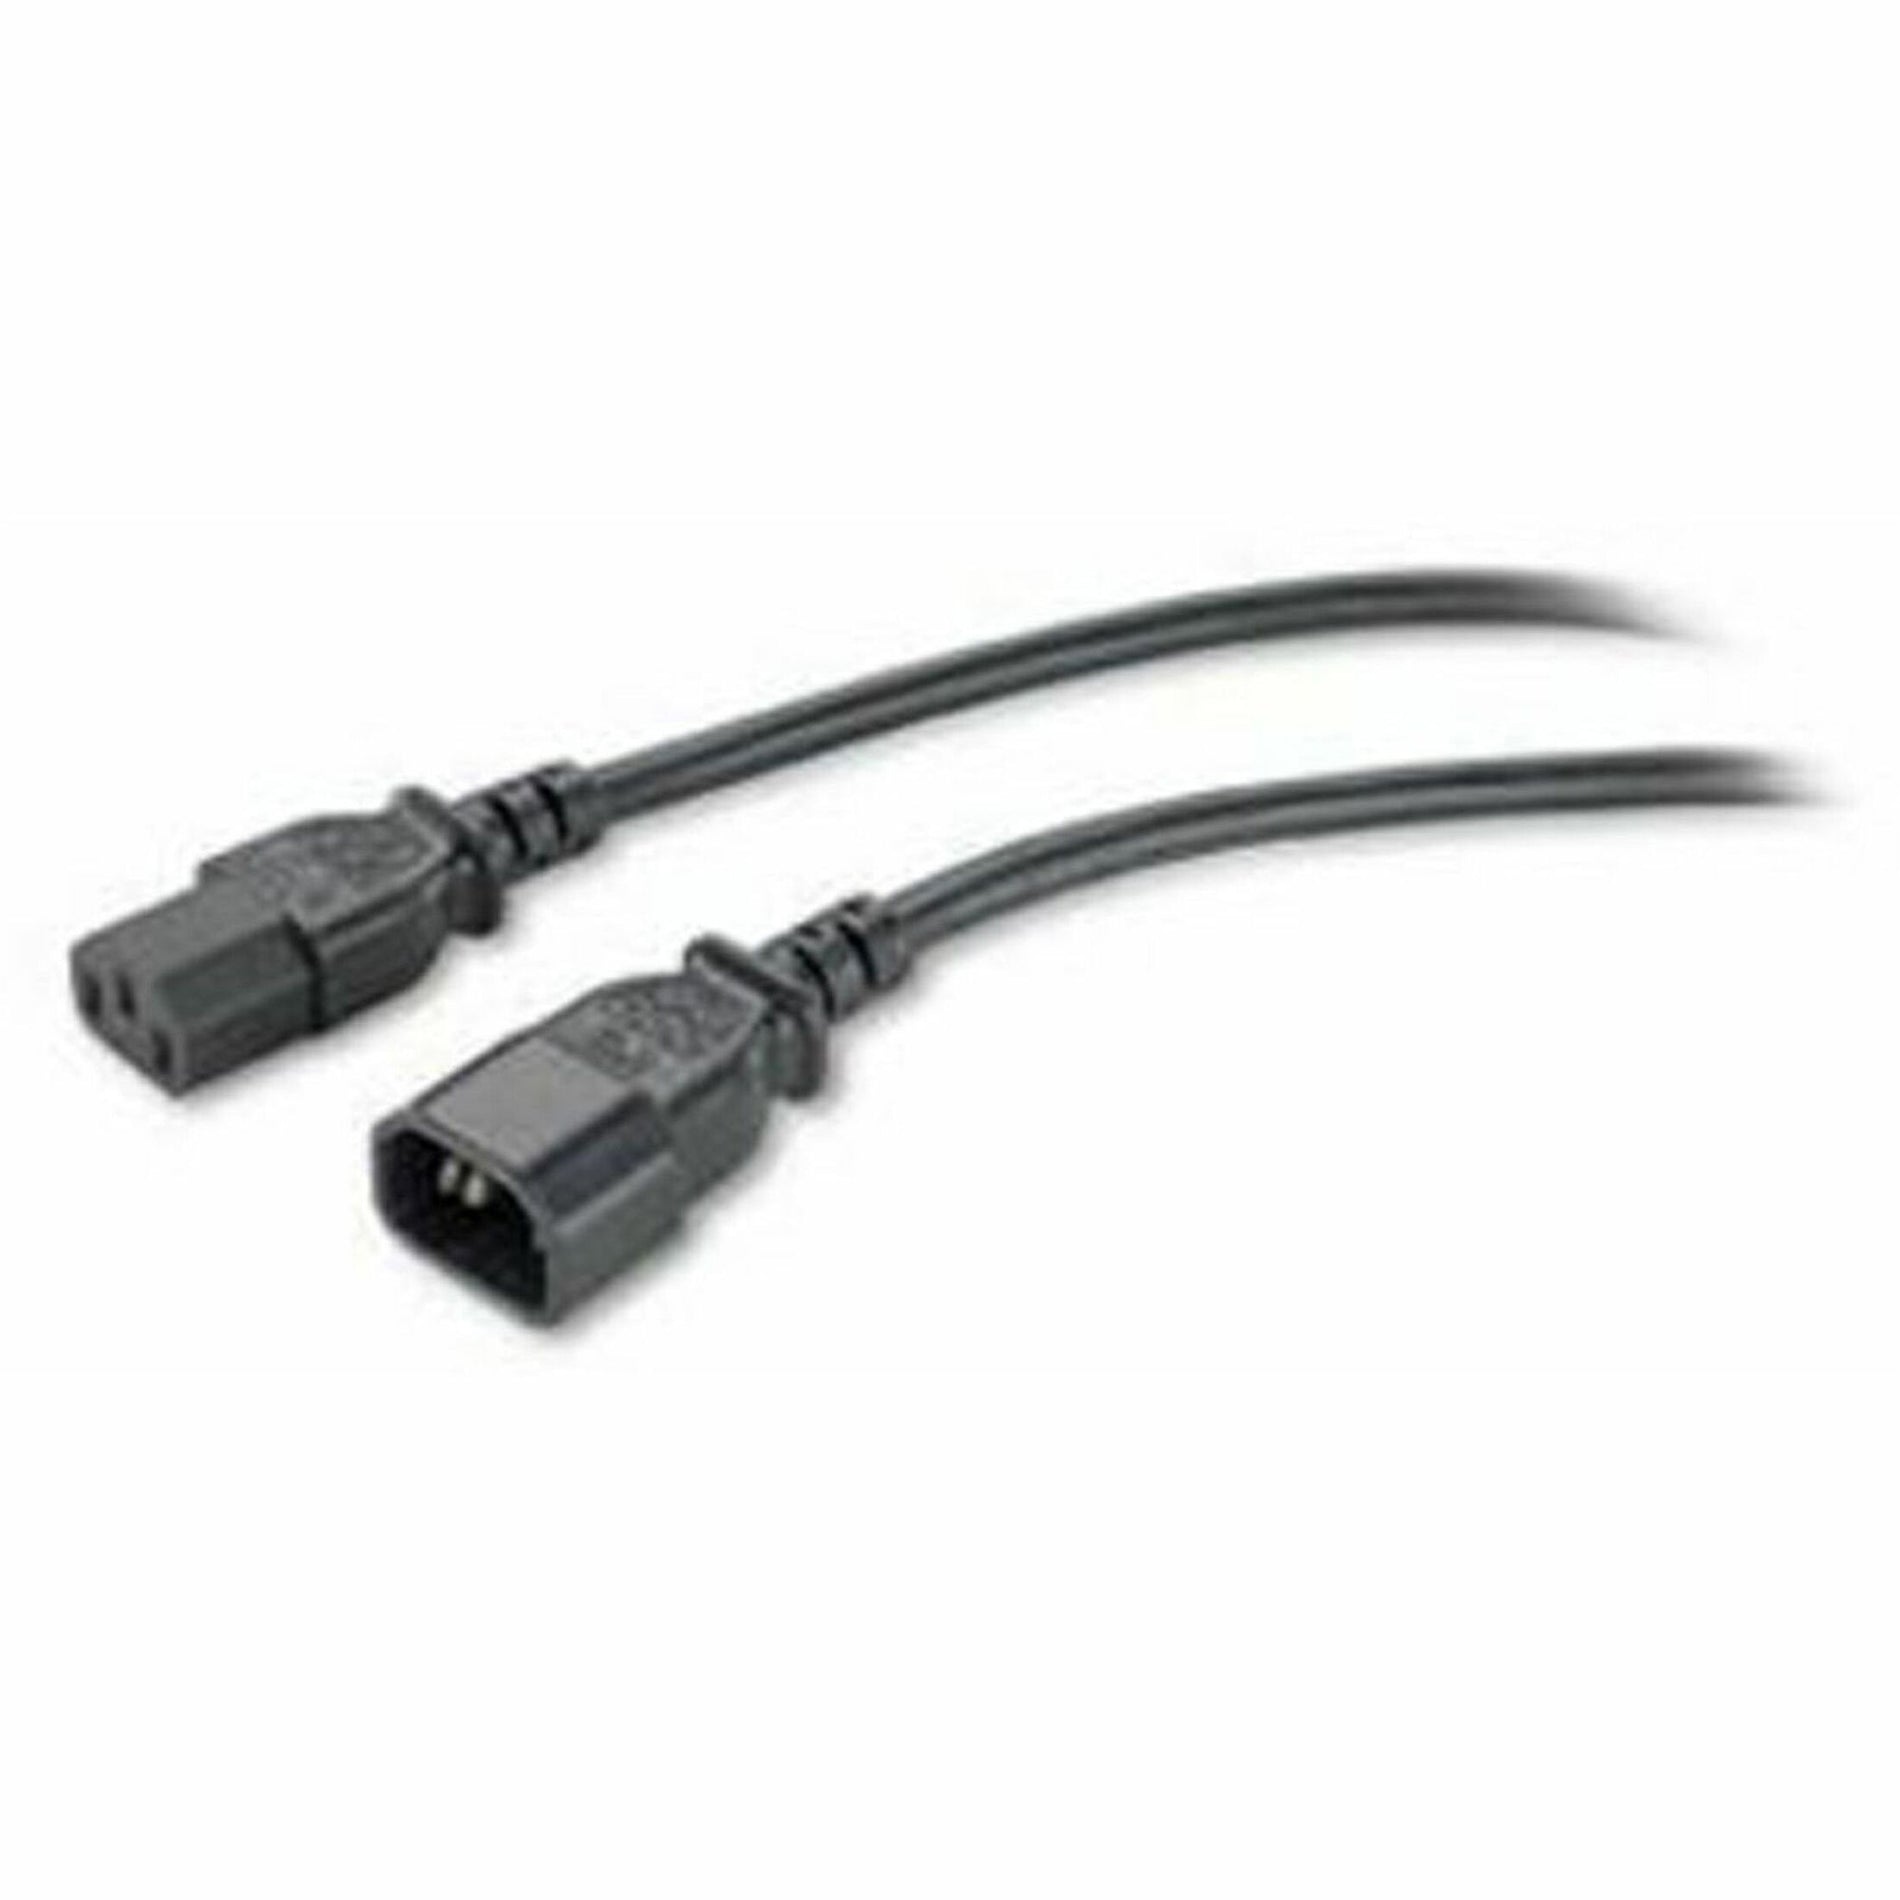 APC AP9870 Power Extension Cable, 250V AC, 8.2ft, Limited Warranty 2 Year